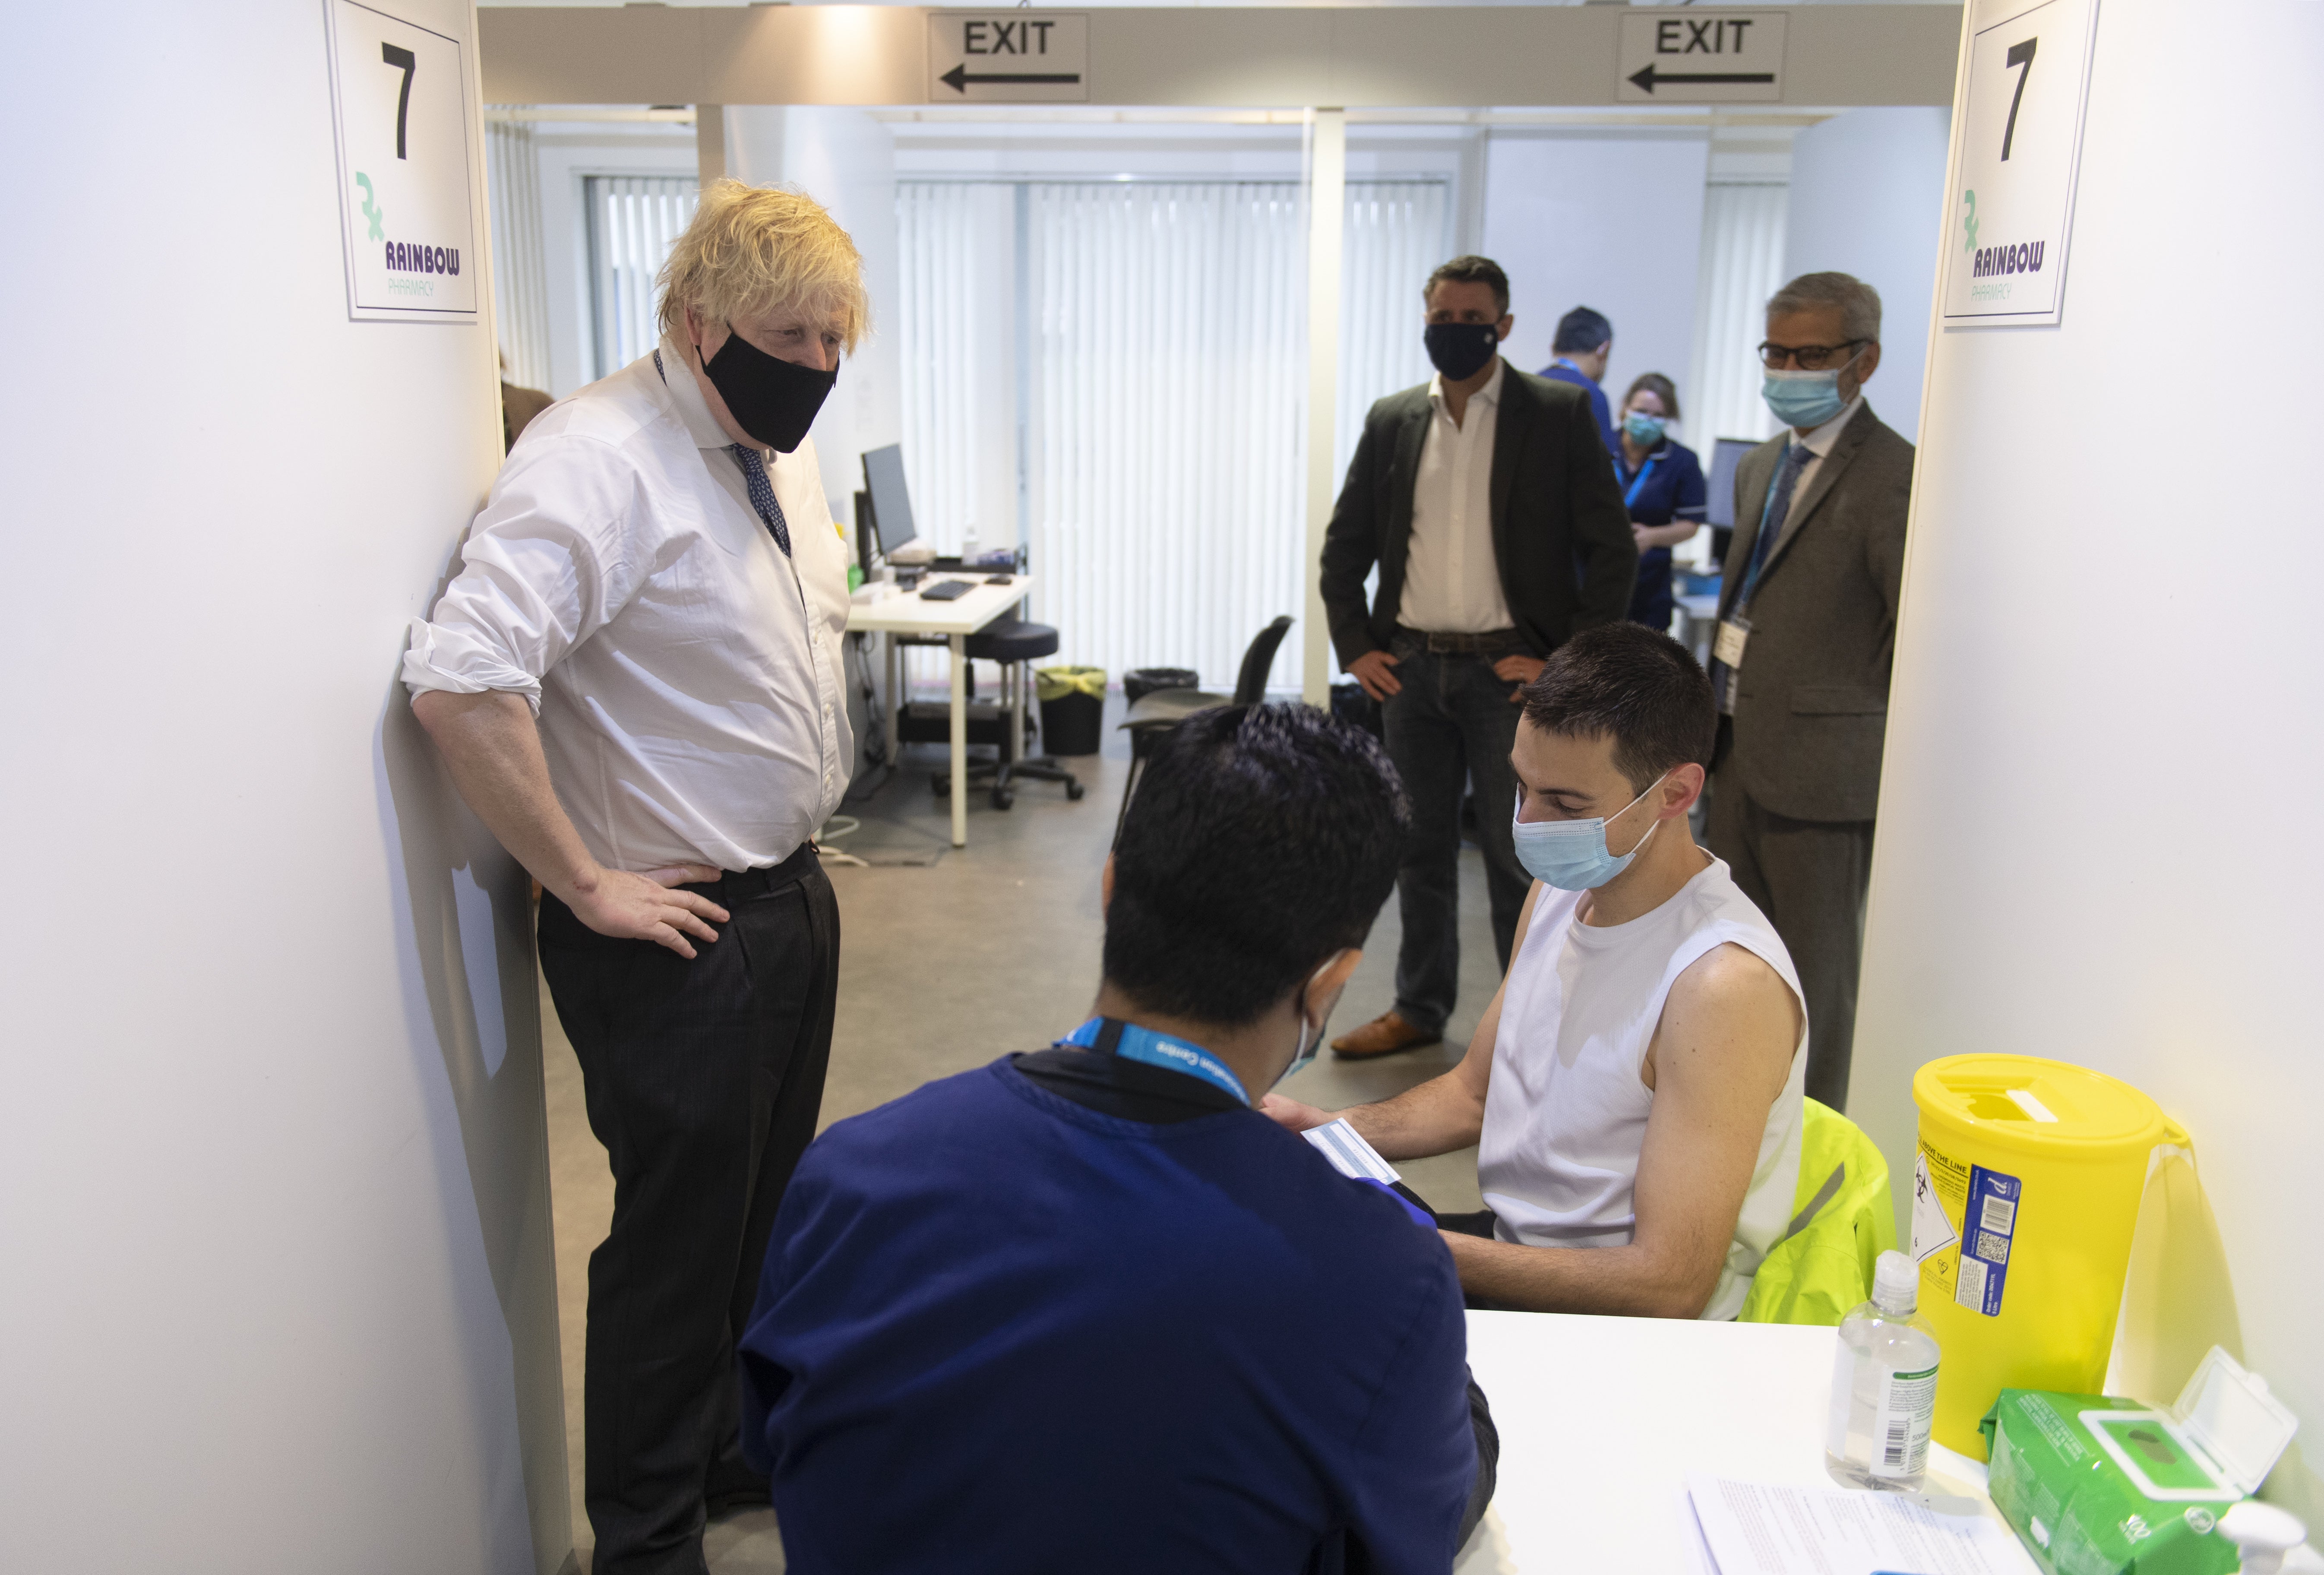 Prime Minister Boris Johnson during a visit to a Covid vaccination centre in Milton Keynes (Geoff Pugh/Daily Telegraph/PA)